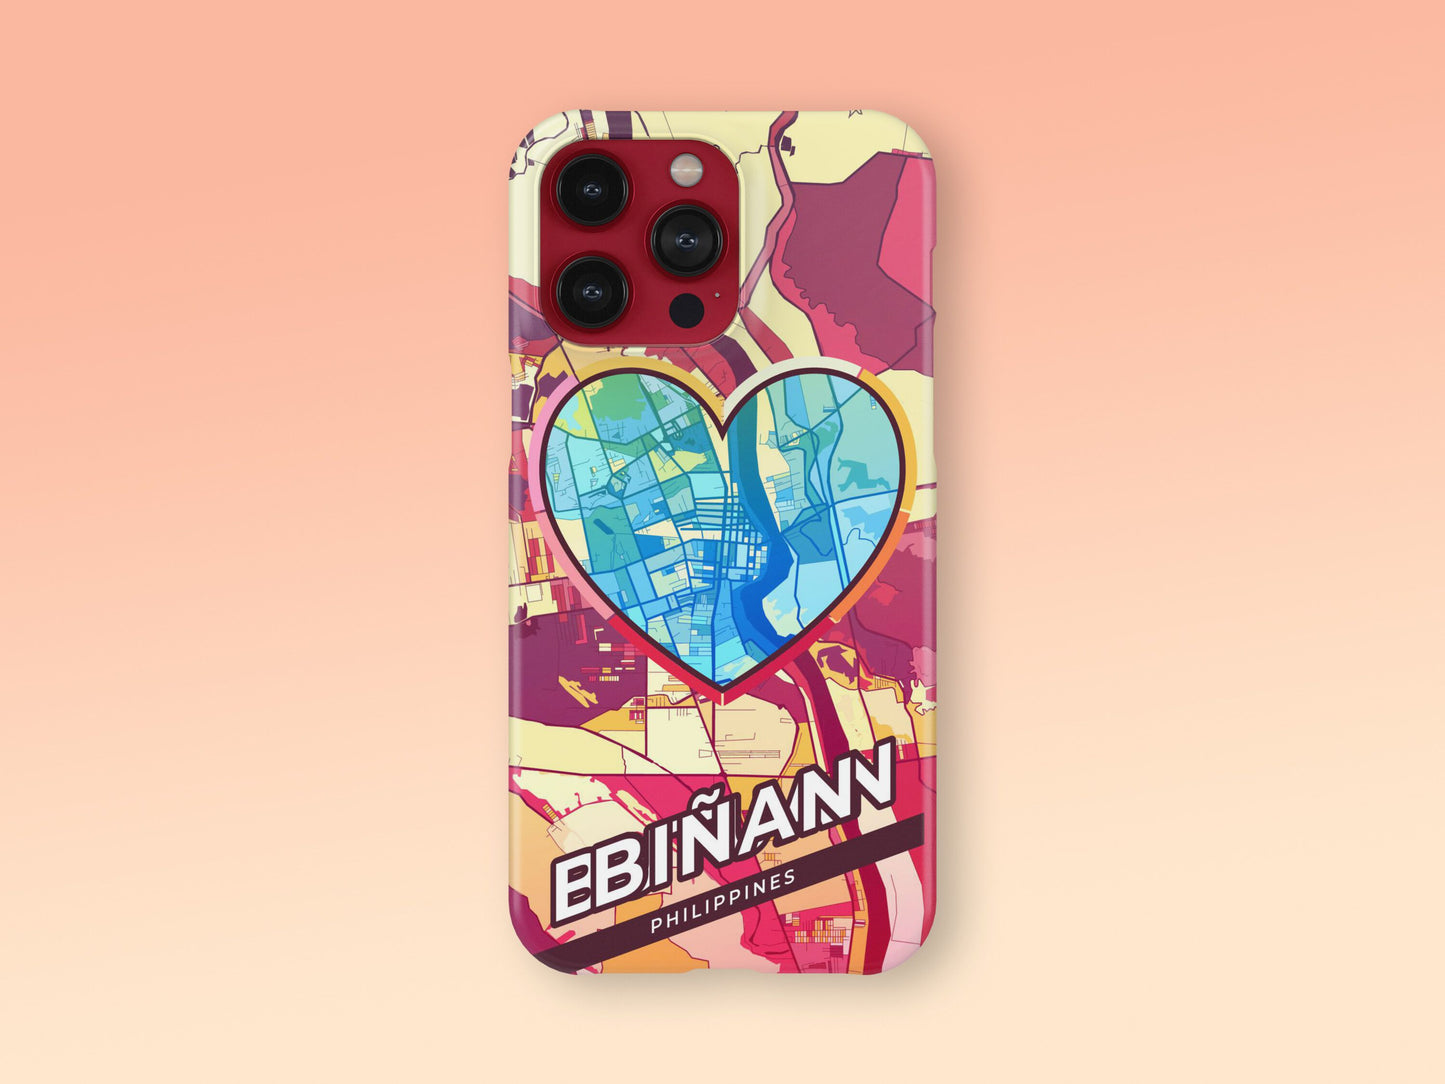 Biñan Philippines slim phone case with colorful icon. Birthday, wedding or housewarming gift. Couple match cases. 2